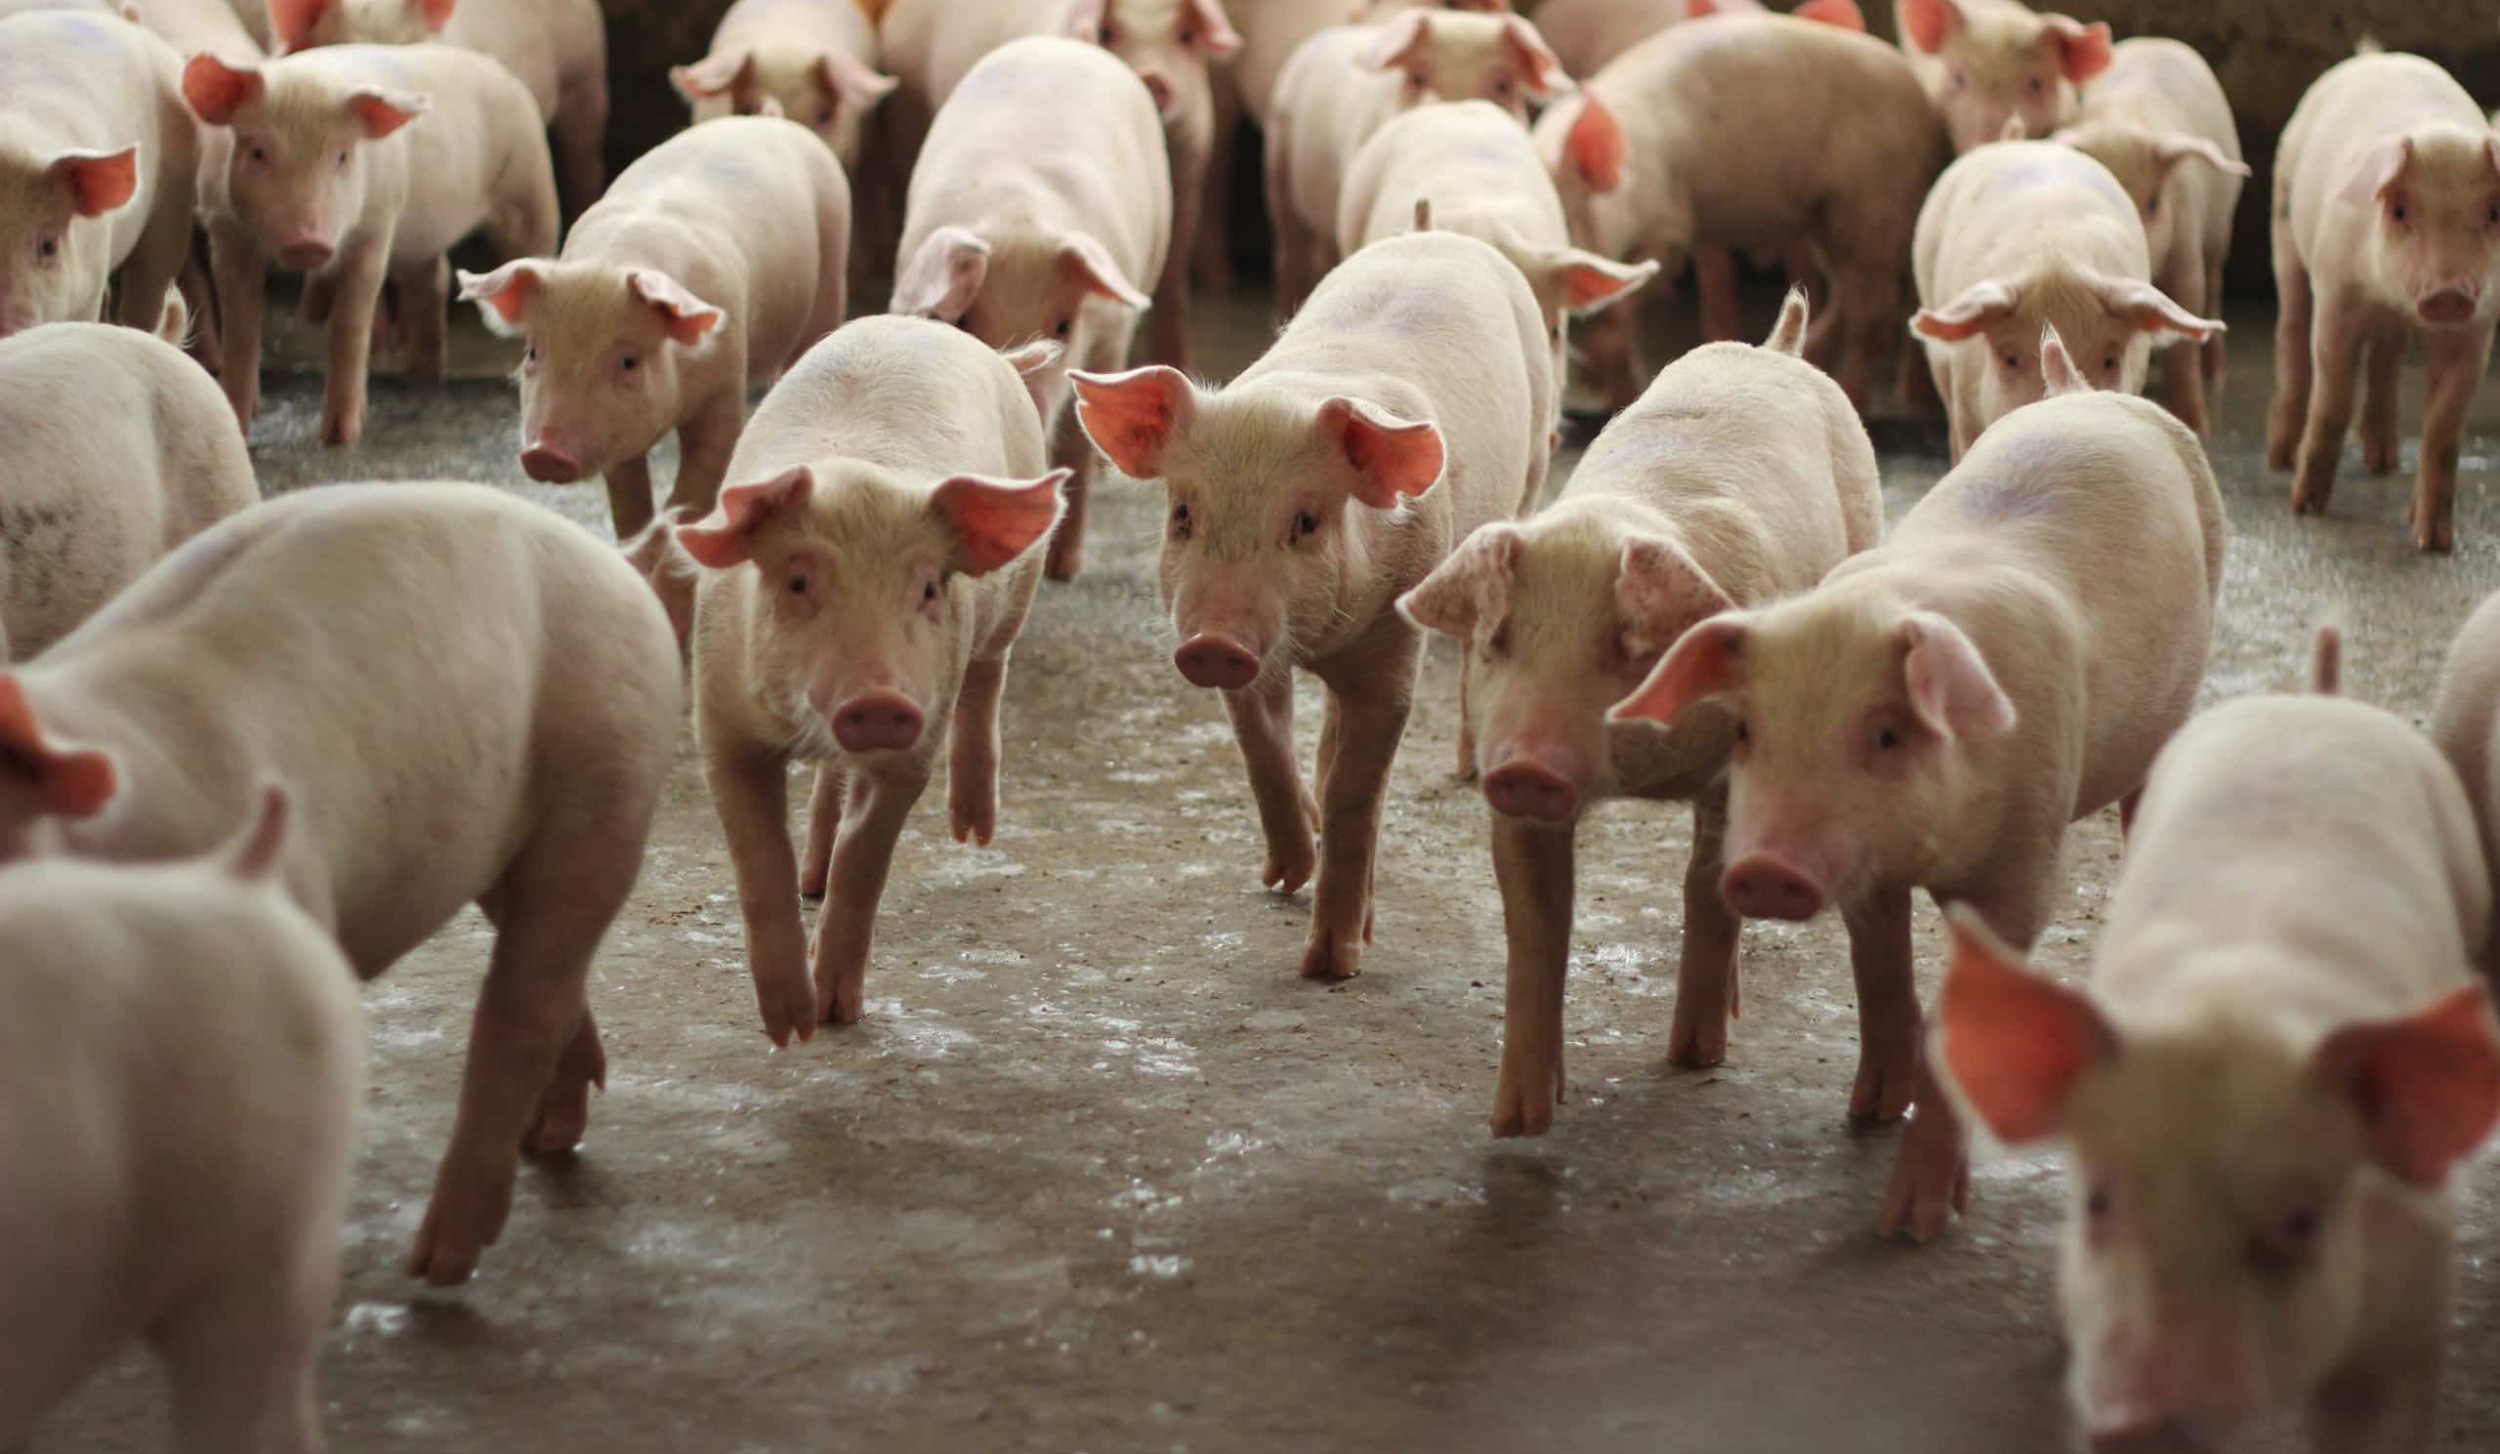 group of grower pig in commercial swine farm